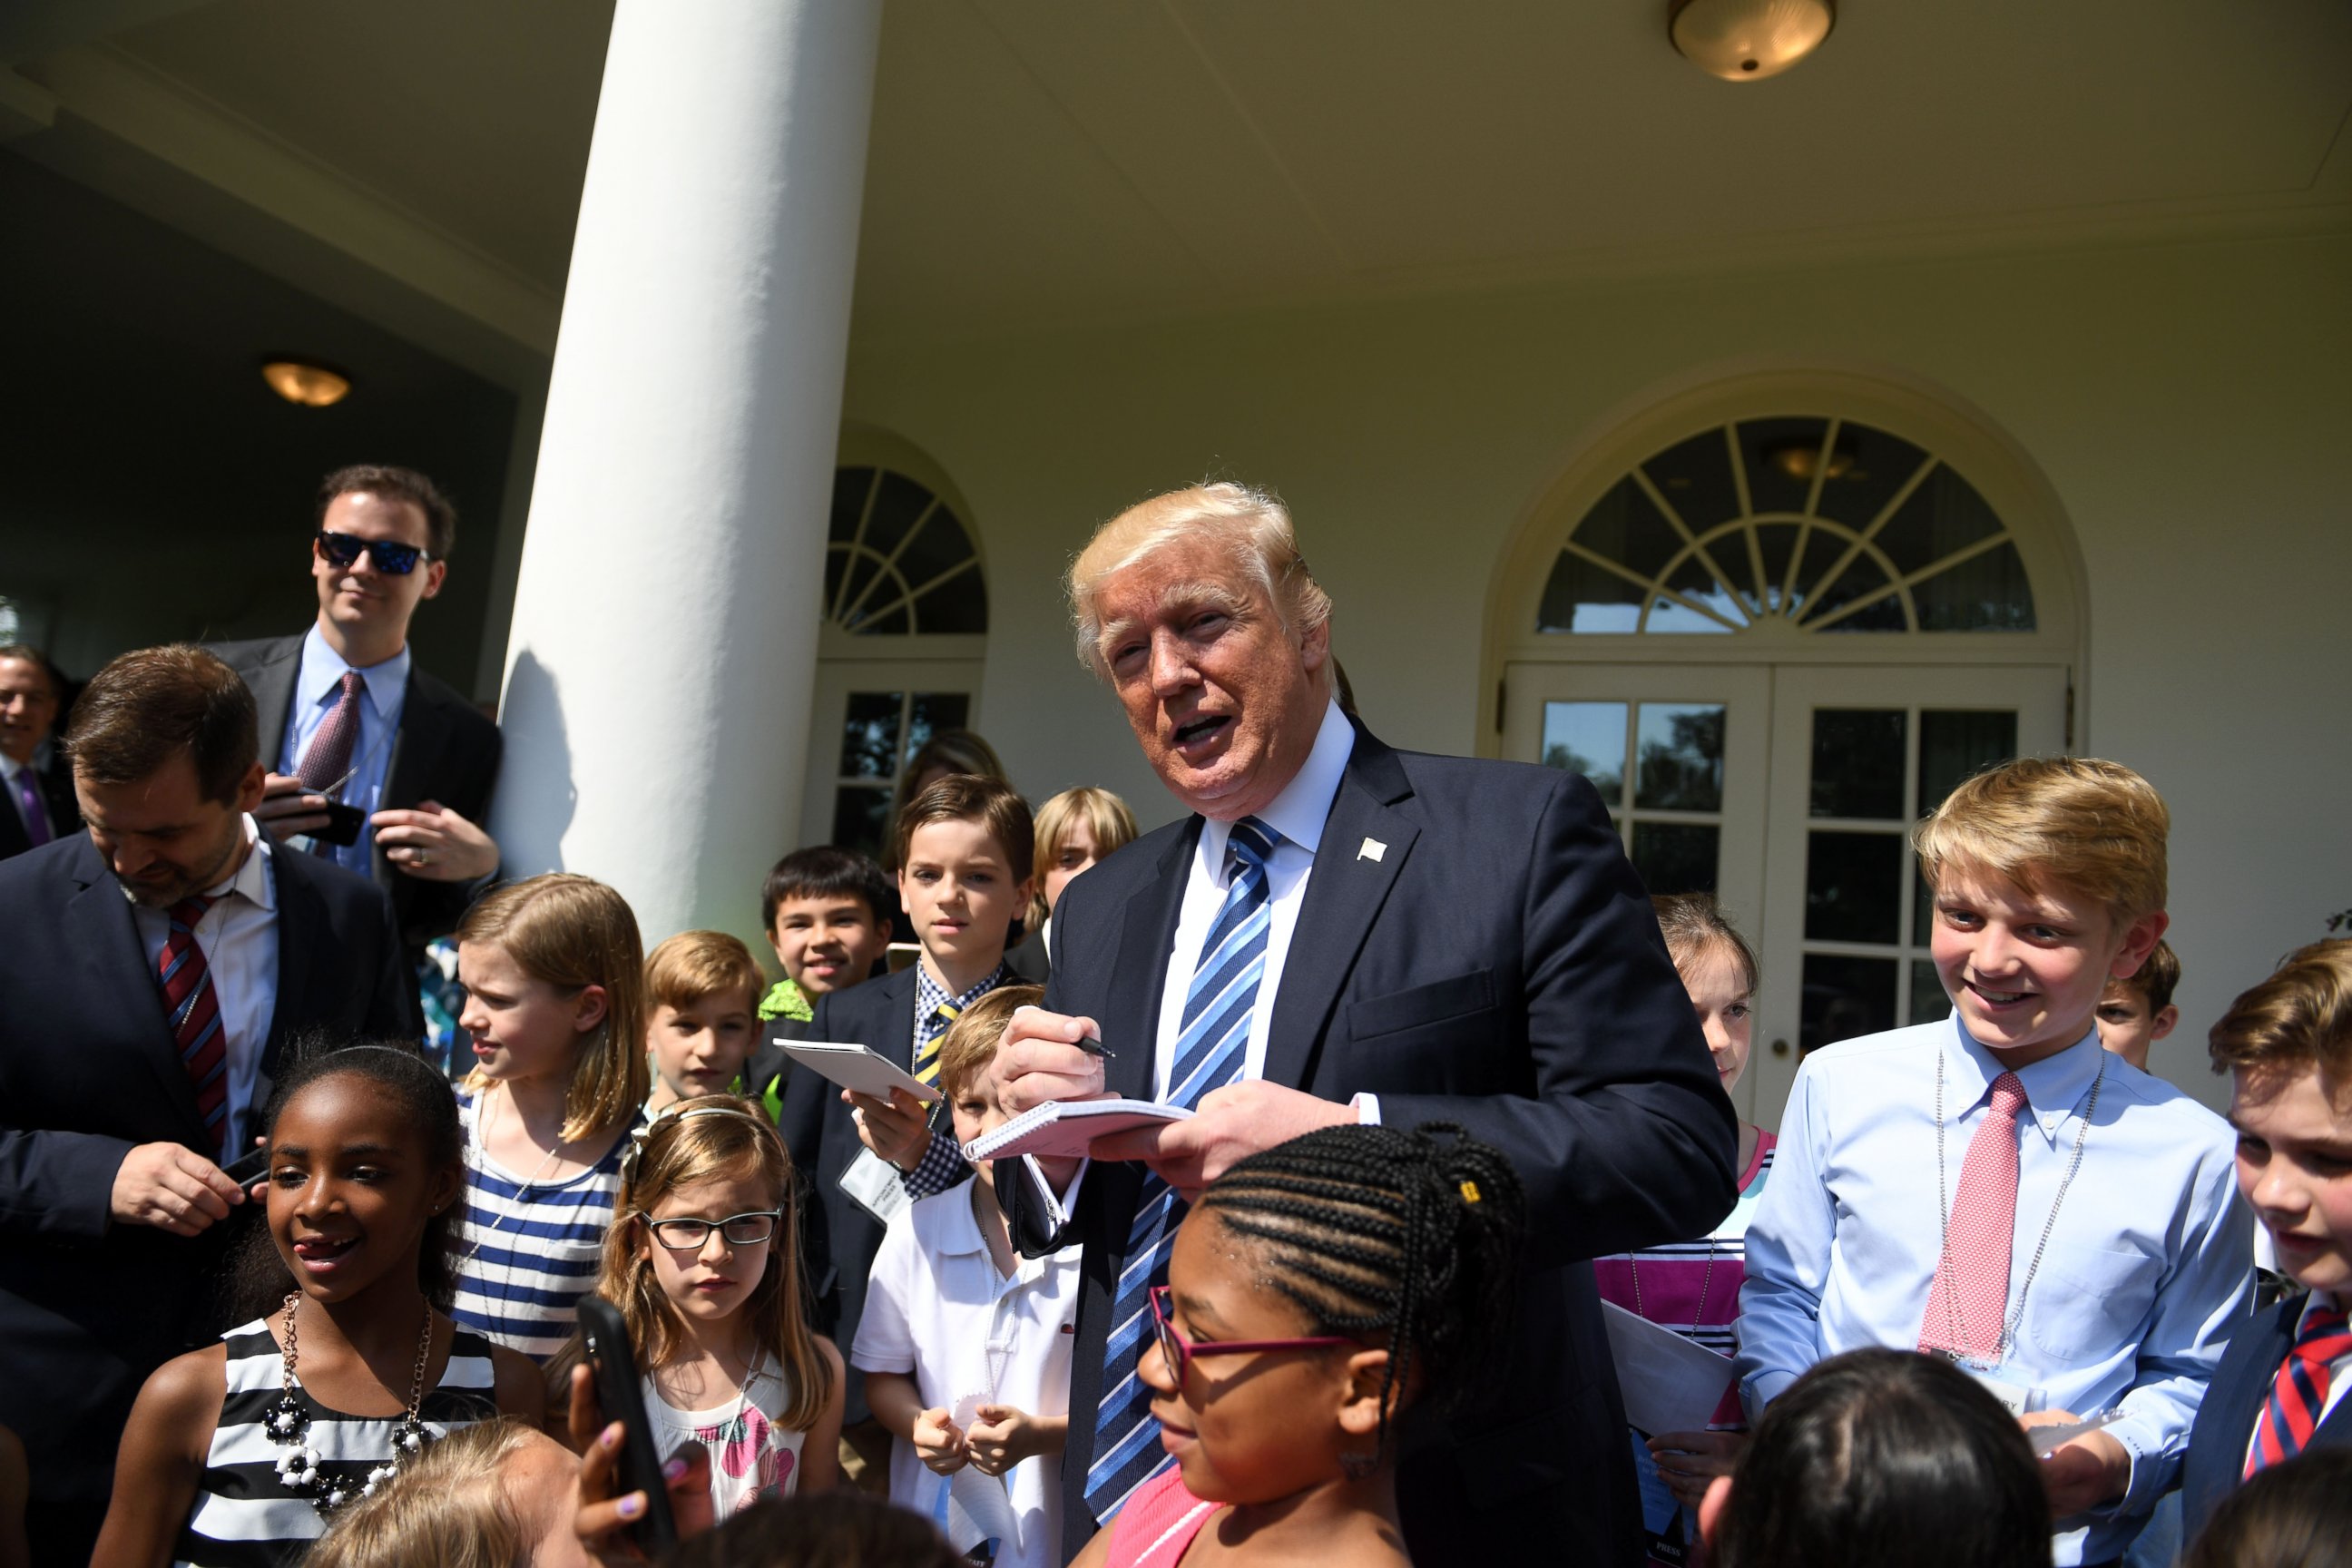 PHOTO: U.S. President Donald Trump signs autographs for children of White House staffers and reporters during "Take Our Daughters and Sons to Work Day" at the White House in Washington, on April 27, 2017.